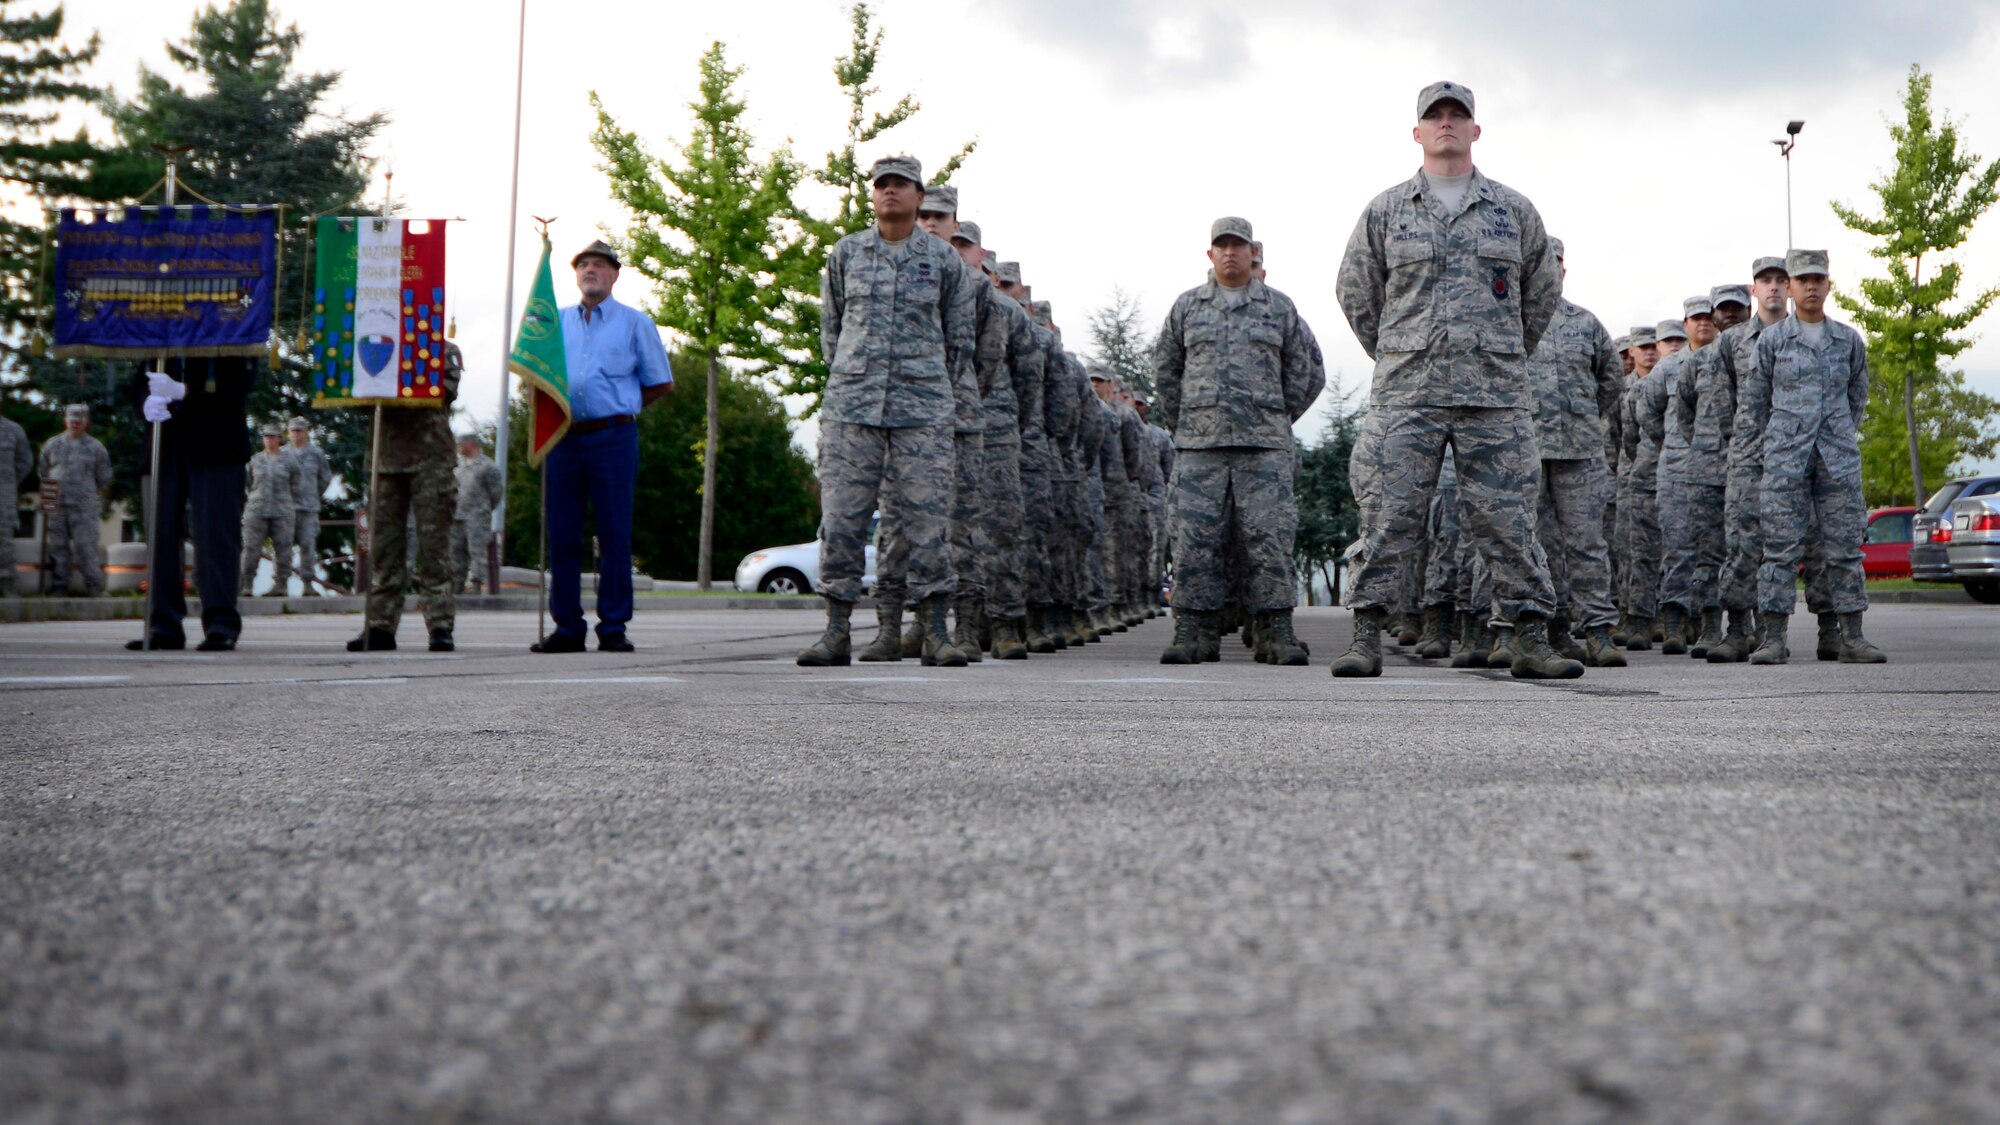 Team Aviano members stand in formation during a retreat ceremony Prisoner of War/Missing in Action Remembrance Week Sept. 17, 2015, at Aviano Air Base, Italy. According to the Defense POW/MIA Accounting Agency, there are still 83,114 service members, since World War II, who are unaccounted for. (U.S. Air Force photo by Senior Airman Areca T. Bell/Released)